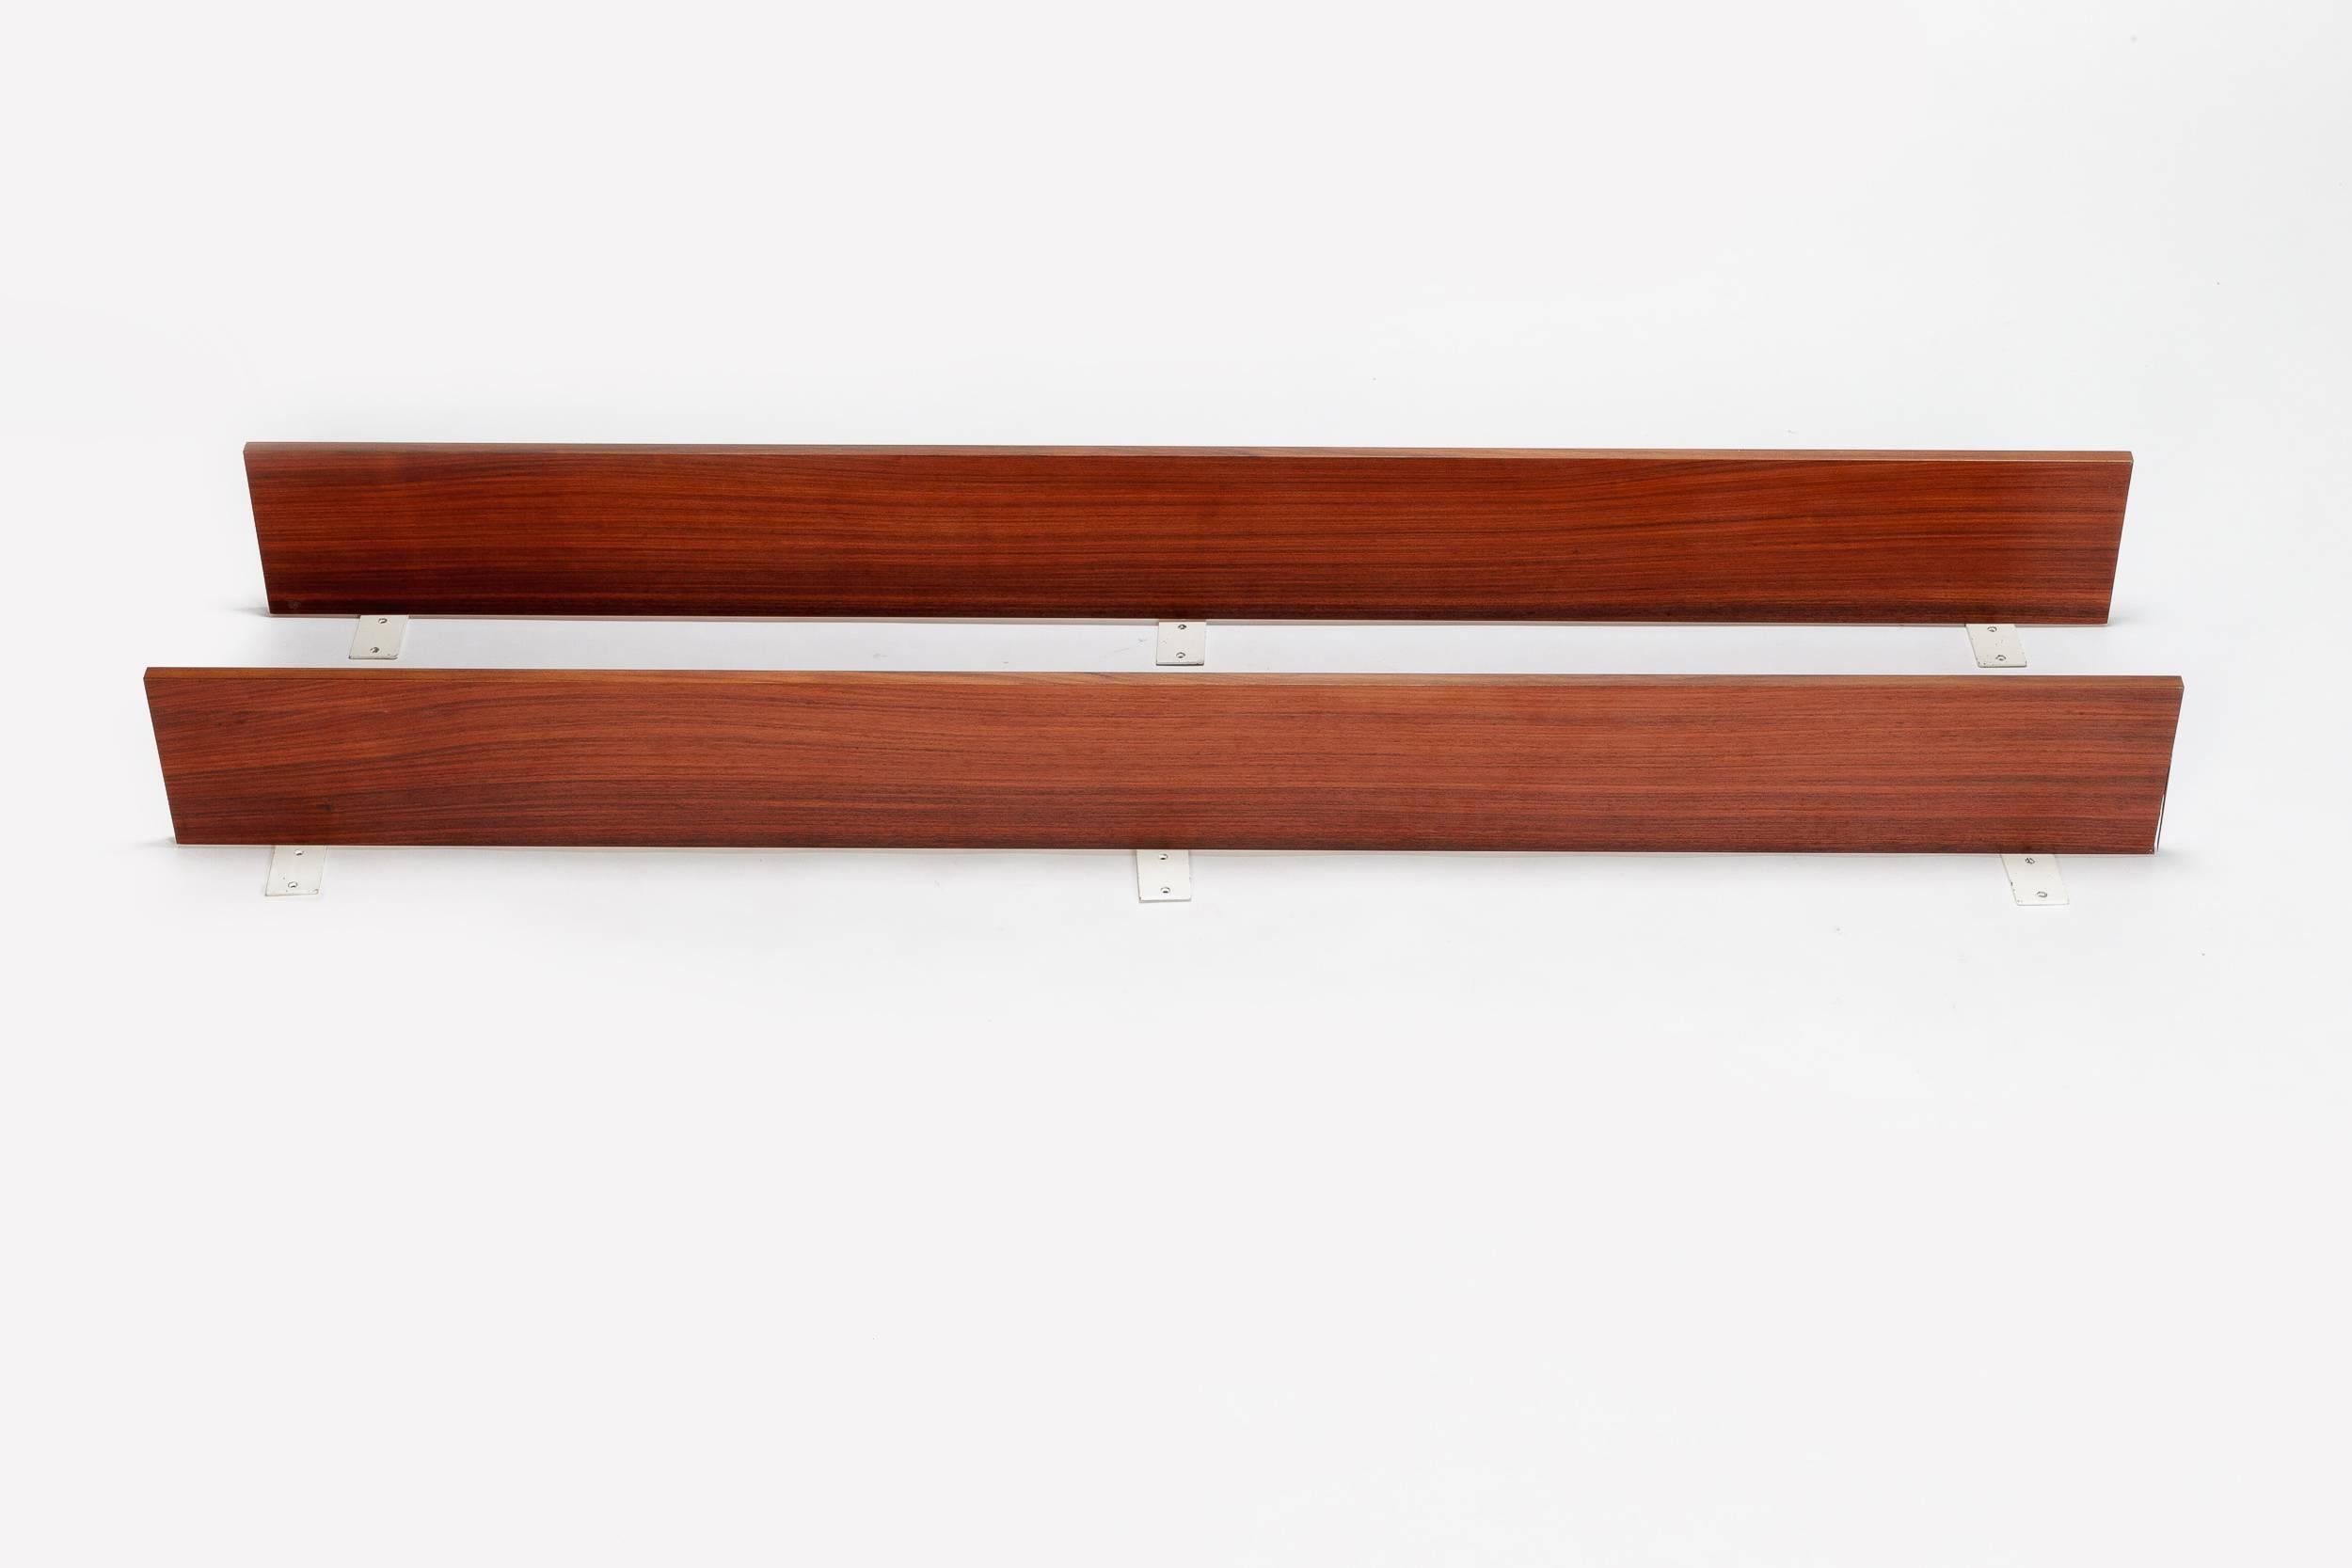 Pair of Swiss design Dieter Waeckerlin shelves from the 1960s, manufactured by Idealheim in Switzerland. Very high quality craftsmanship with a sophisticated system. Made of white lacquered metal wall mounts and shelves of rosewood veneer.